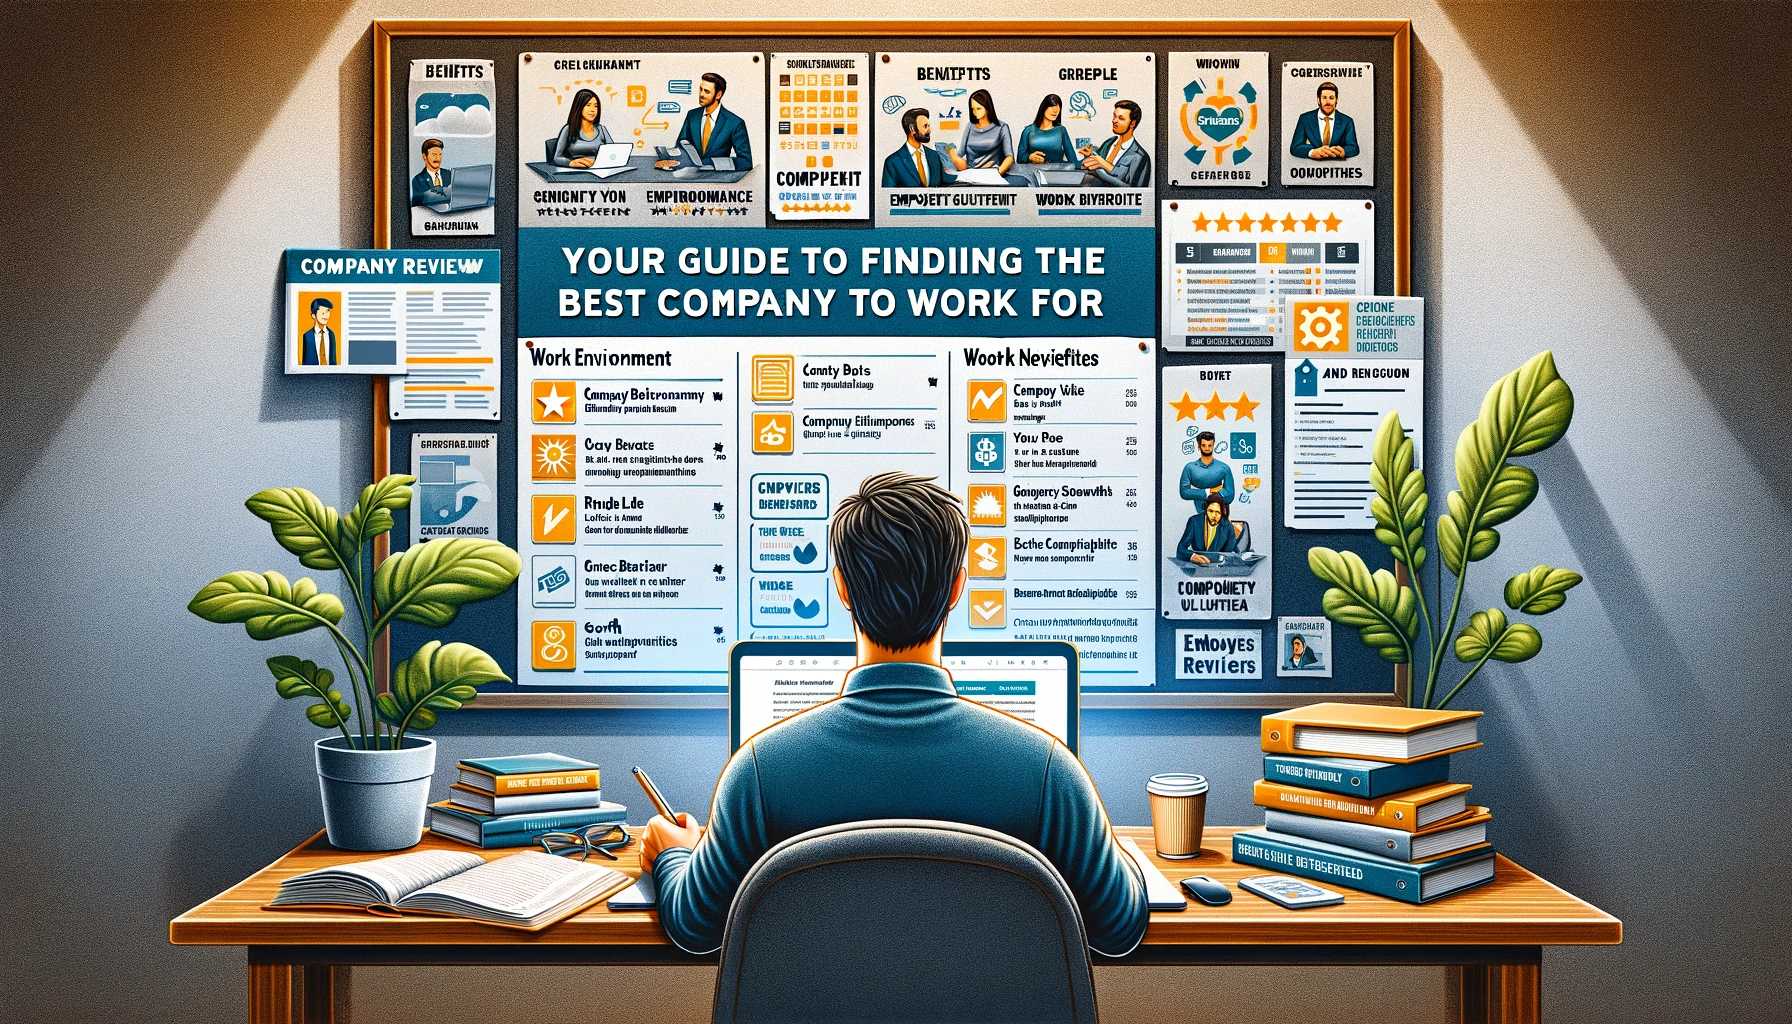 Your Guide to Finding the Best Company to Work For